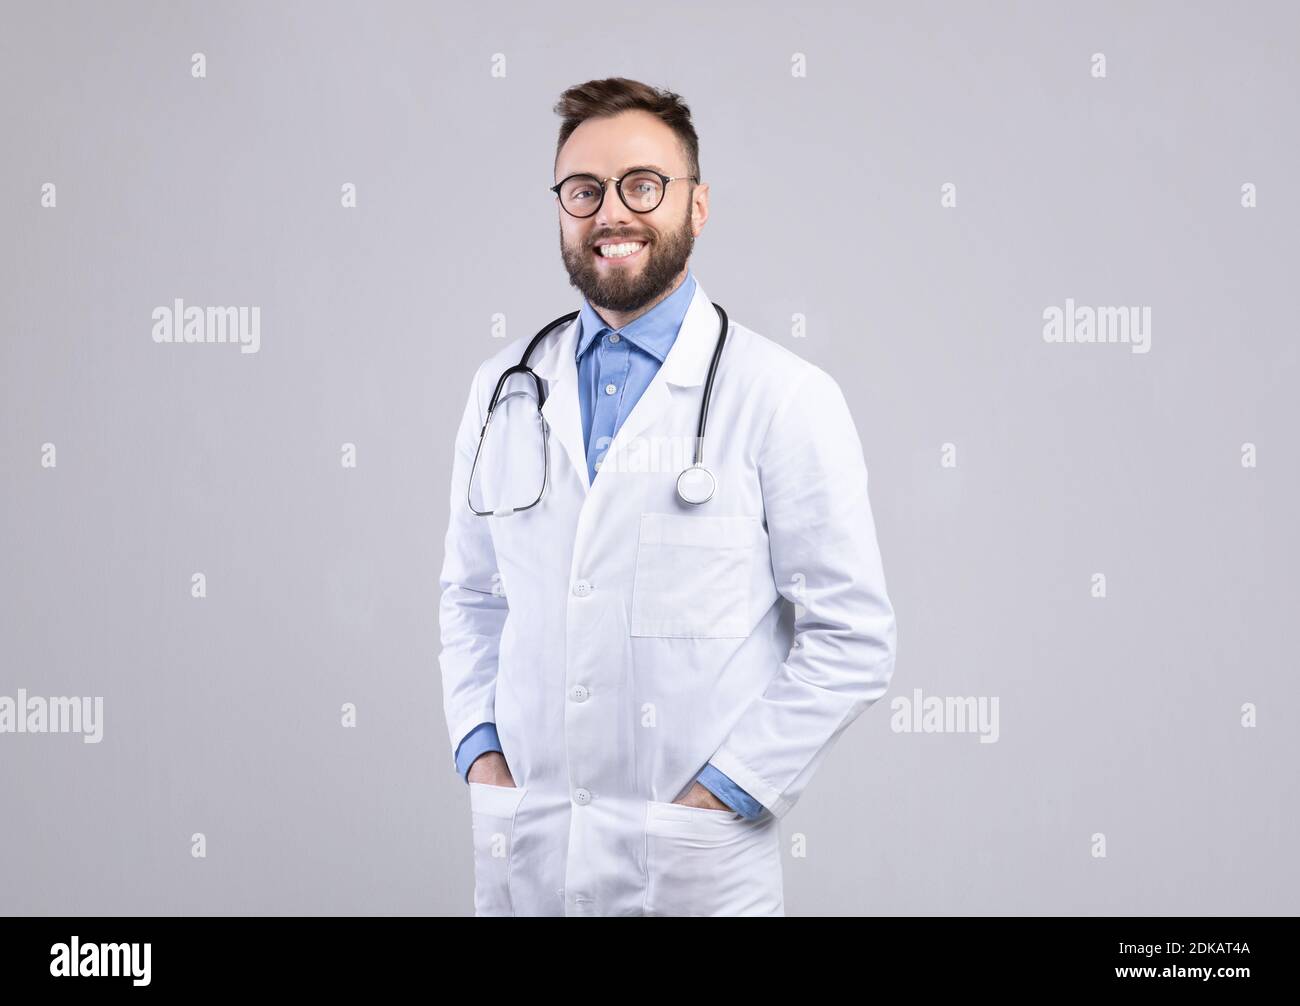 Confident Caucasian male doctor in white uniform smiling and posing over grey studio background Stock Photo